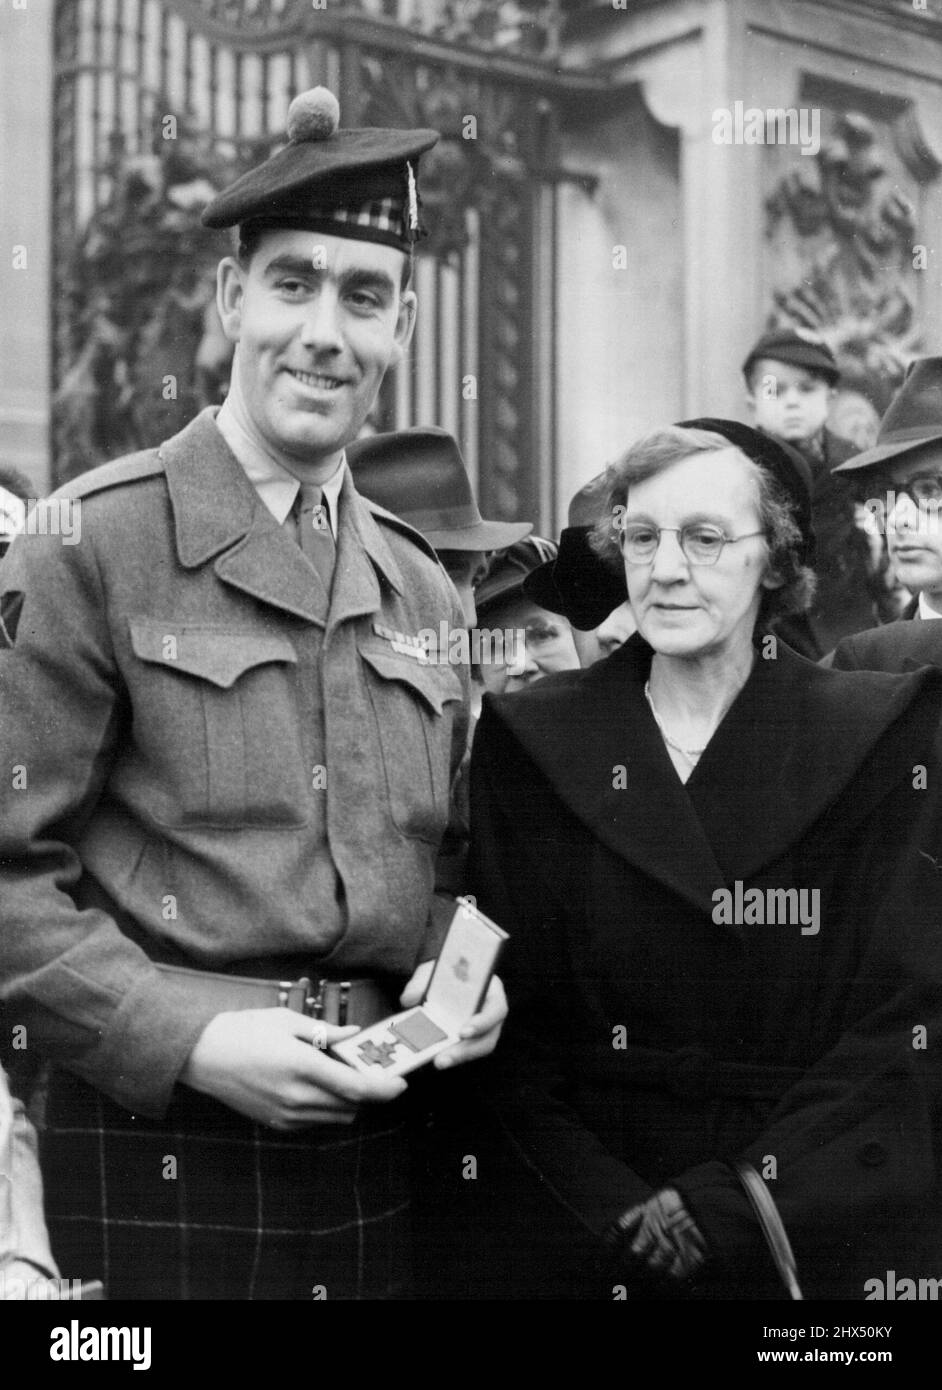 Speakman Receives His V.C. -- Private William Speakman - standing with his mother outside Buckingham Palace - displays his Victoria Cross in its case, after he received it from the Queen at her first investiture of the new reign, in the palace today (Wednesday). He was awarded the ***** for gallantry in Korea. February 27, 1952. (Photo by Reuterphoto). Stock Photo